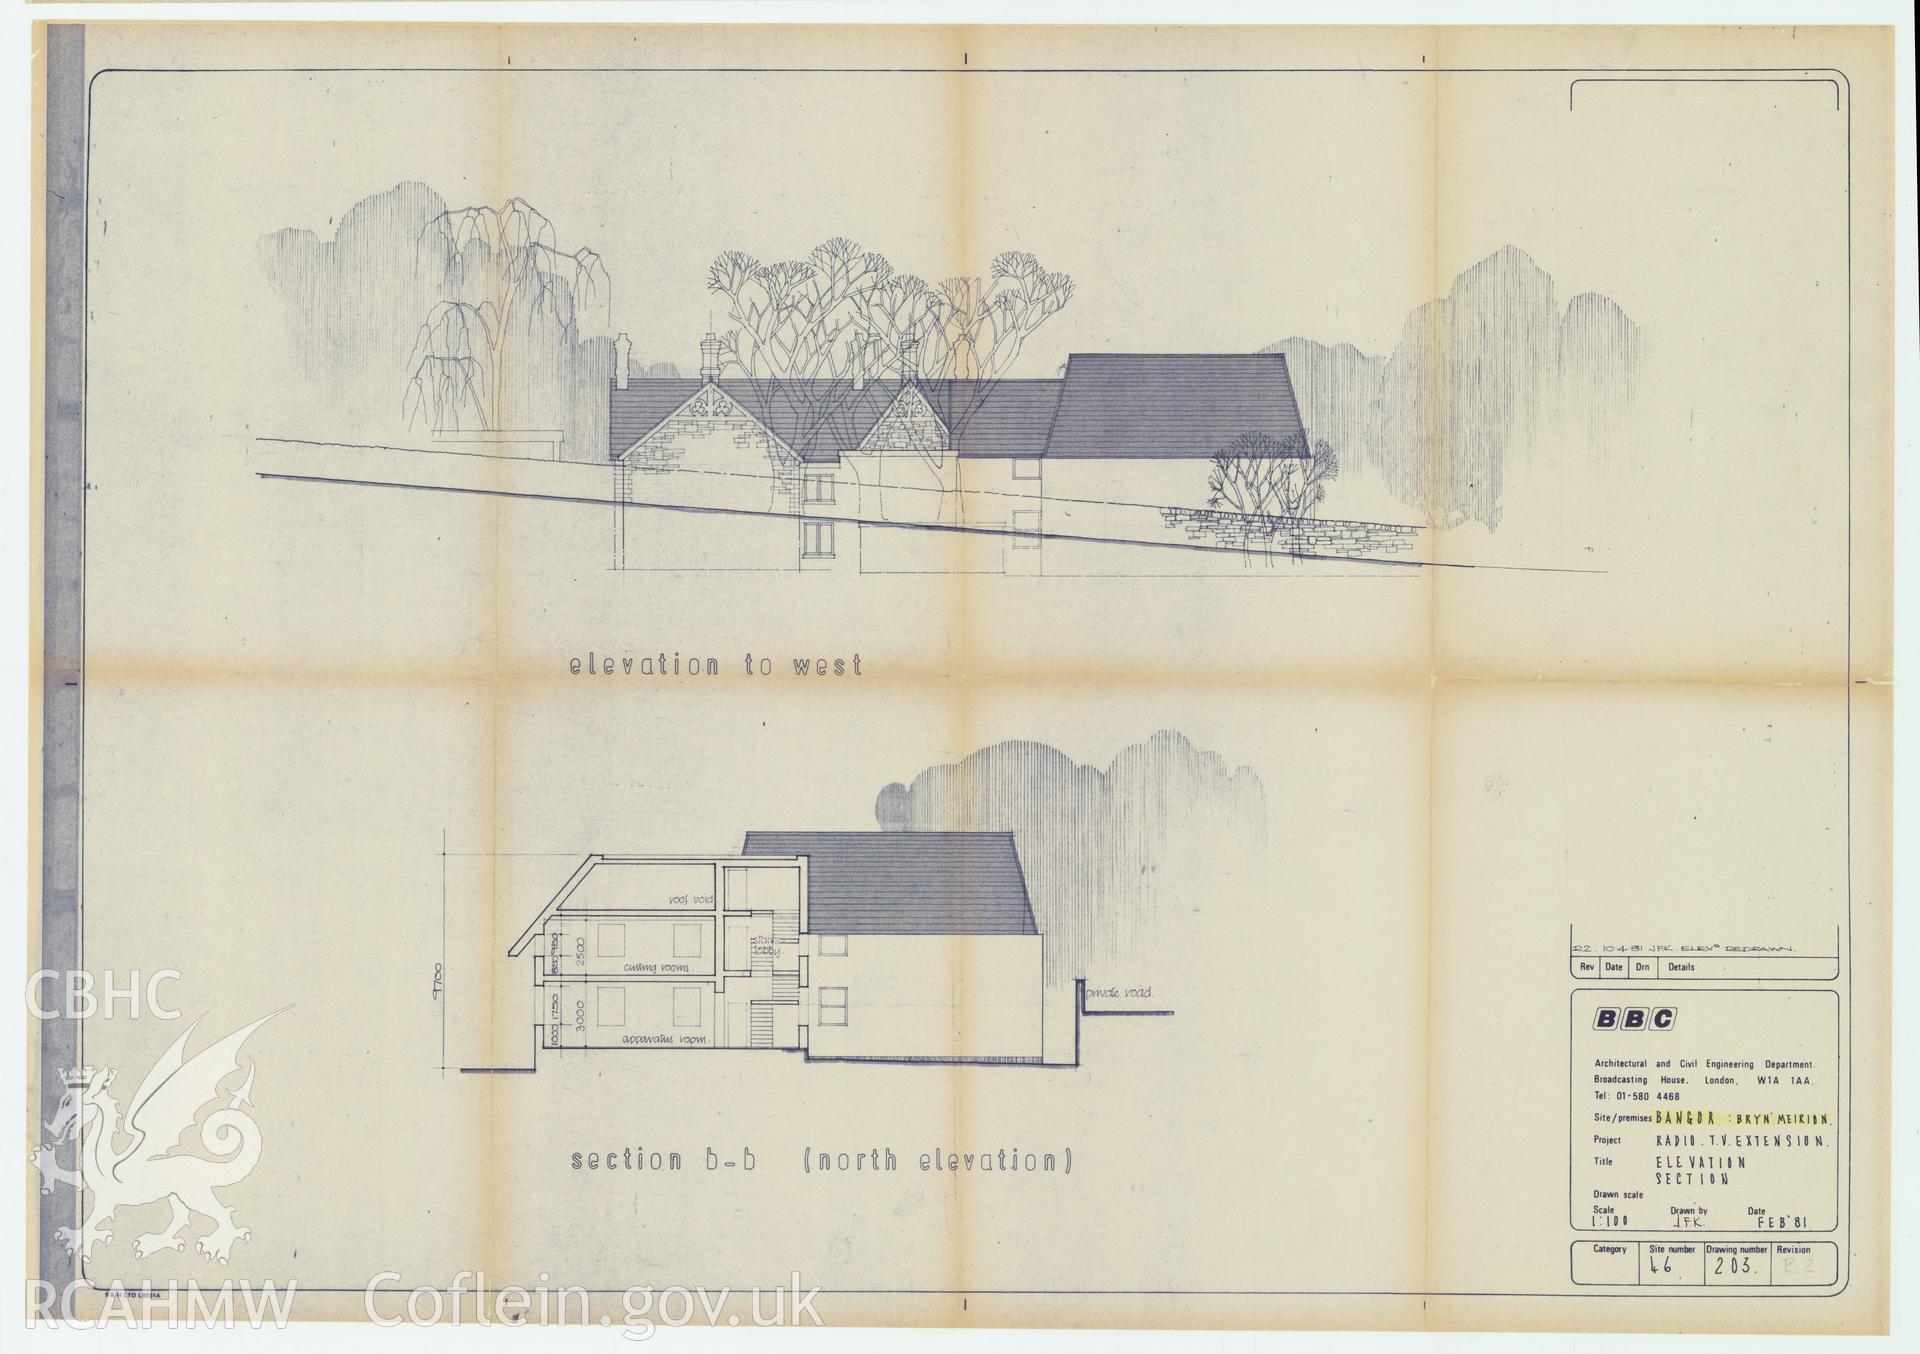 BBC premises, Bryn Meirion, Bangor - elevation and section drawing of the Radio TV extension. Drawing No. 46/203 Rev2, February 1981.